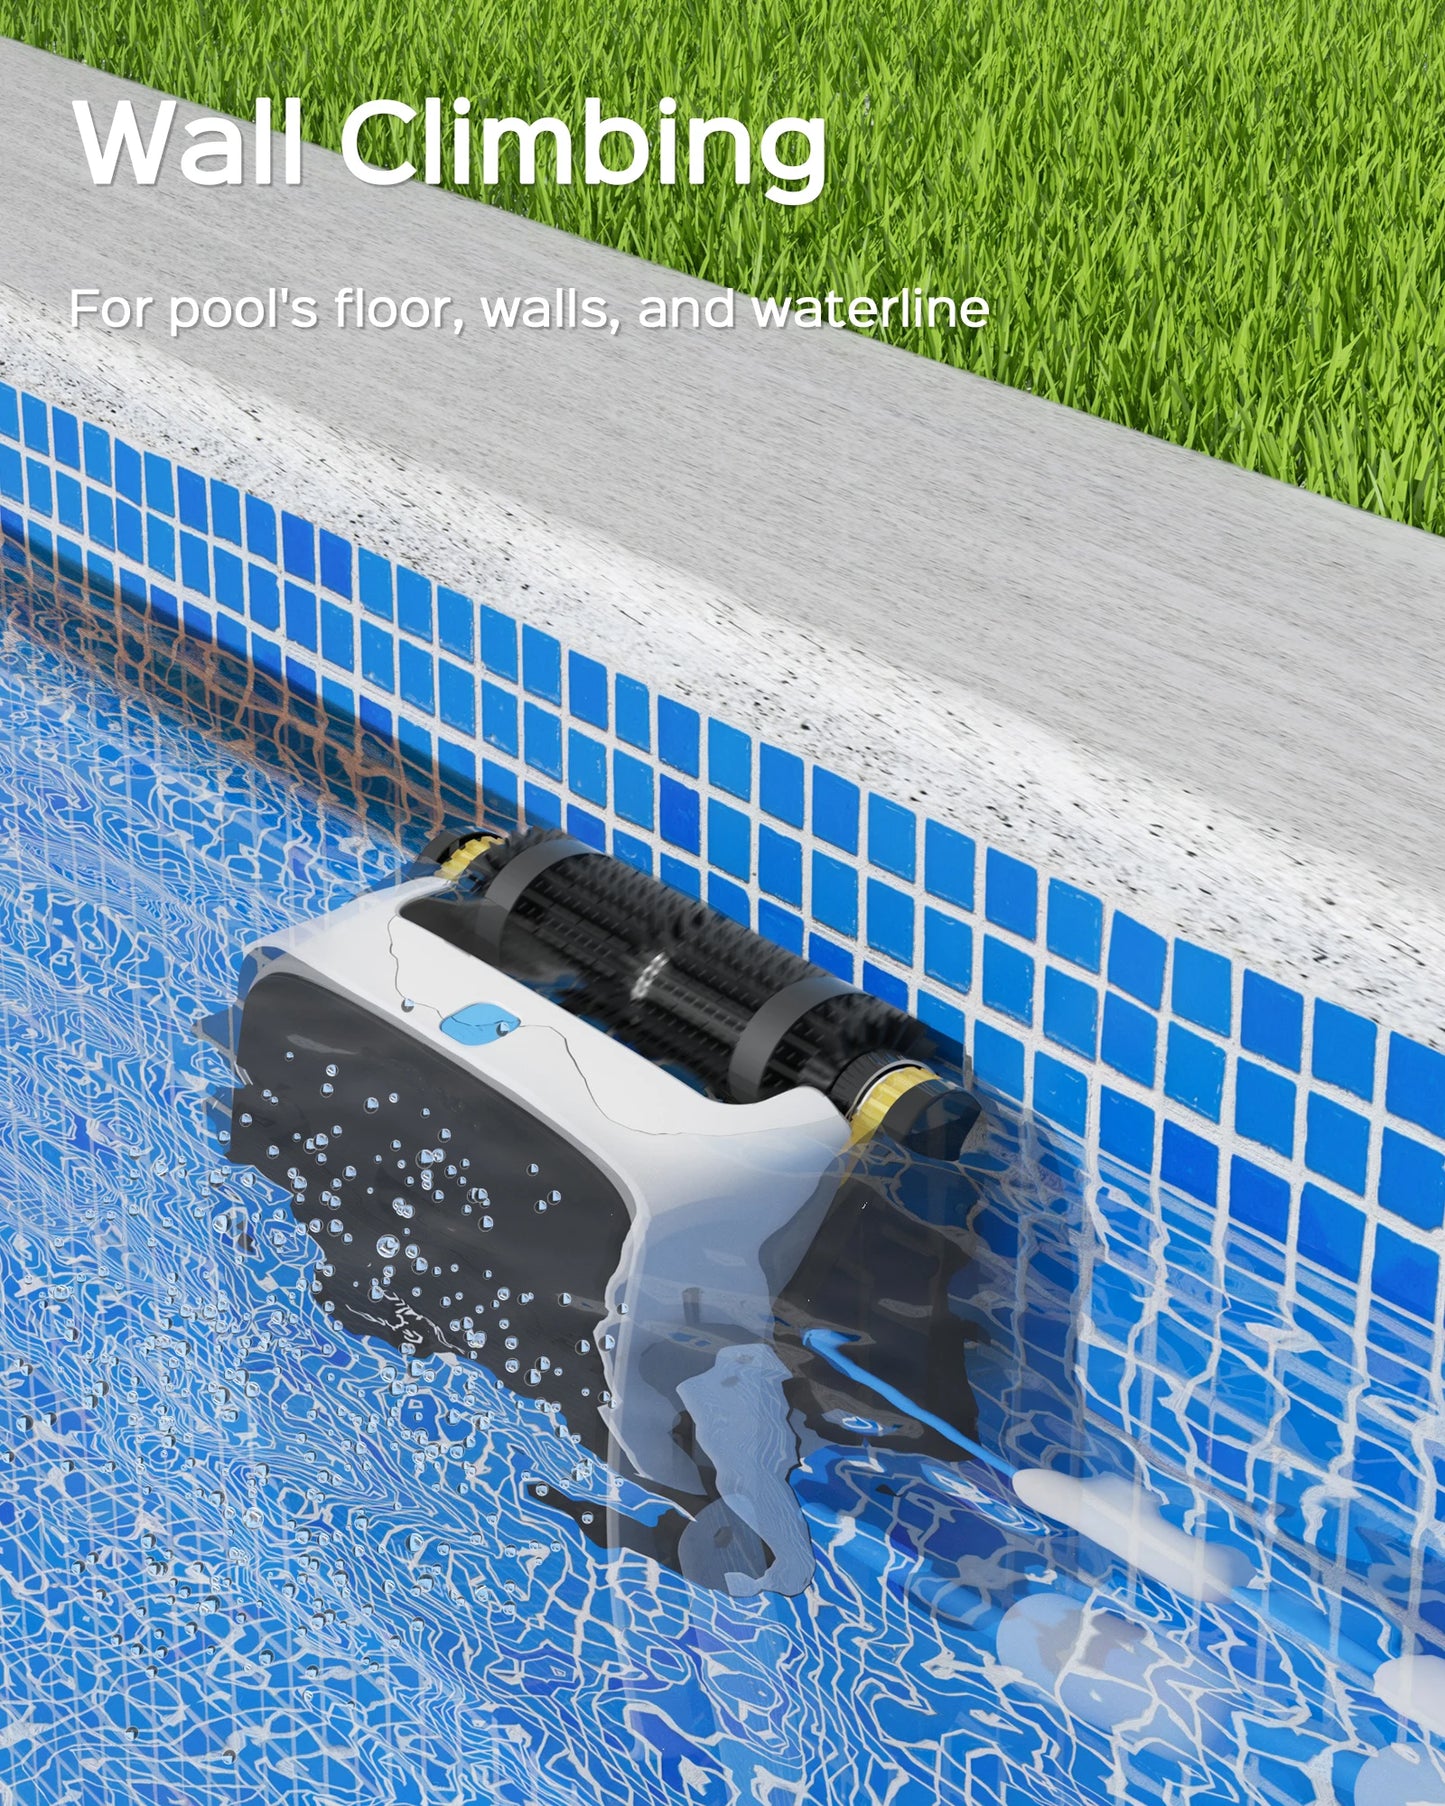 Robot Vacuum Cleaner with Pool Wall-climbing